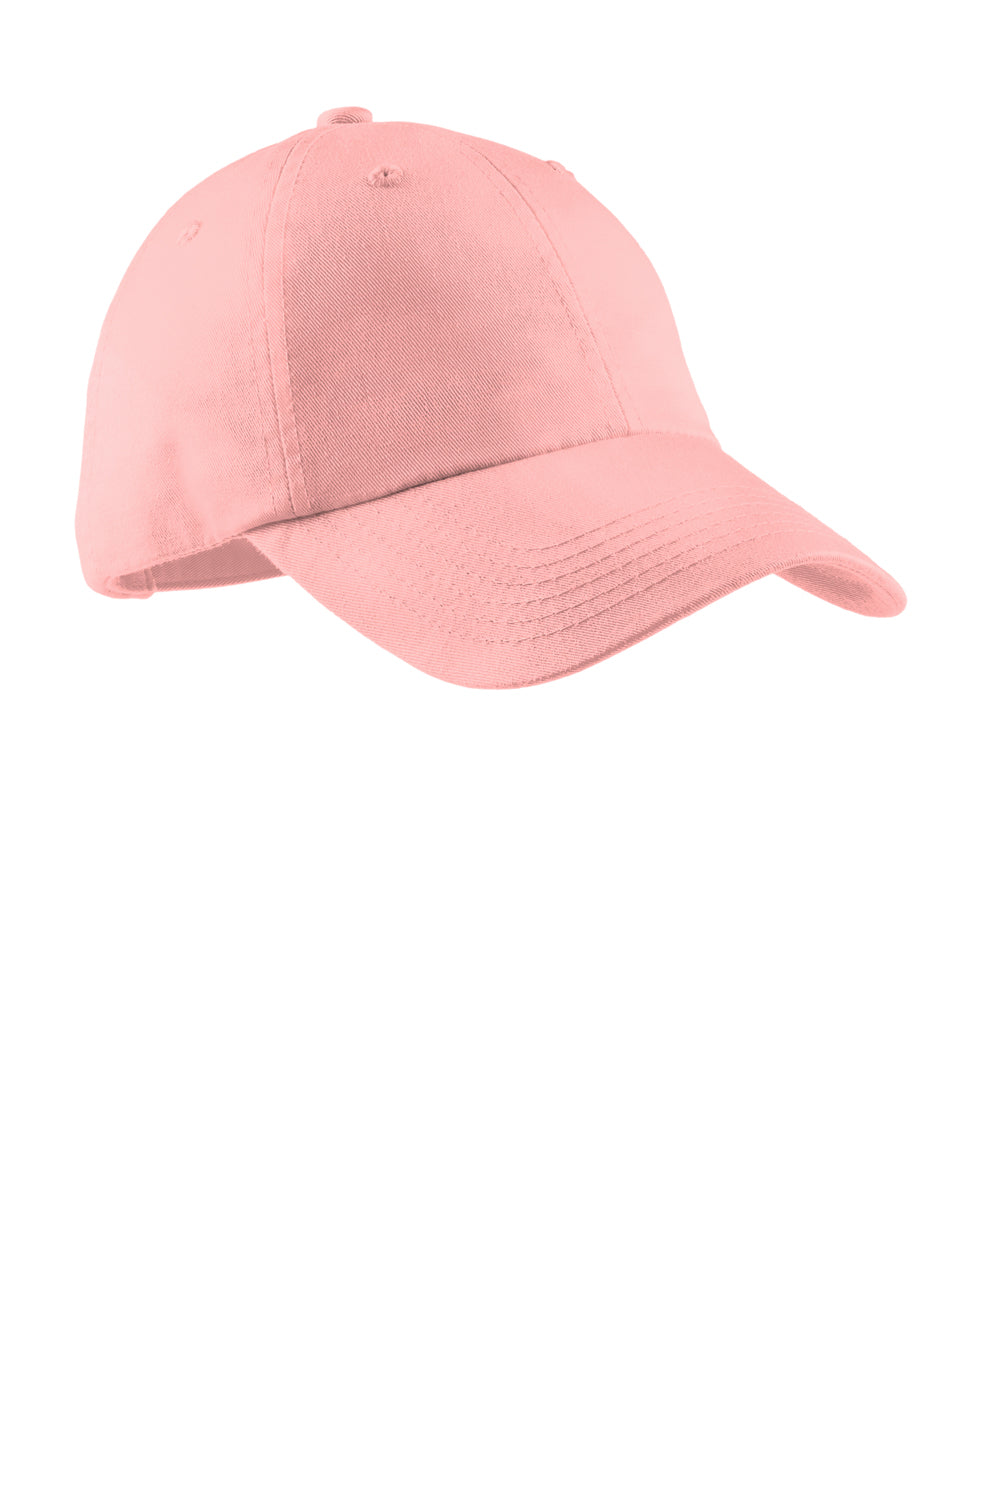 Port Authority LPWU Garment Washed Hat Light Pink Front